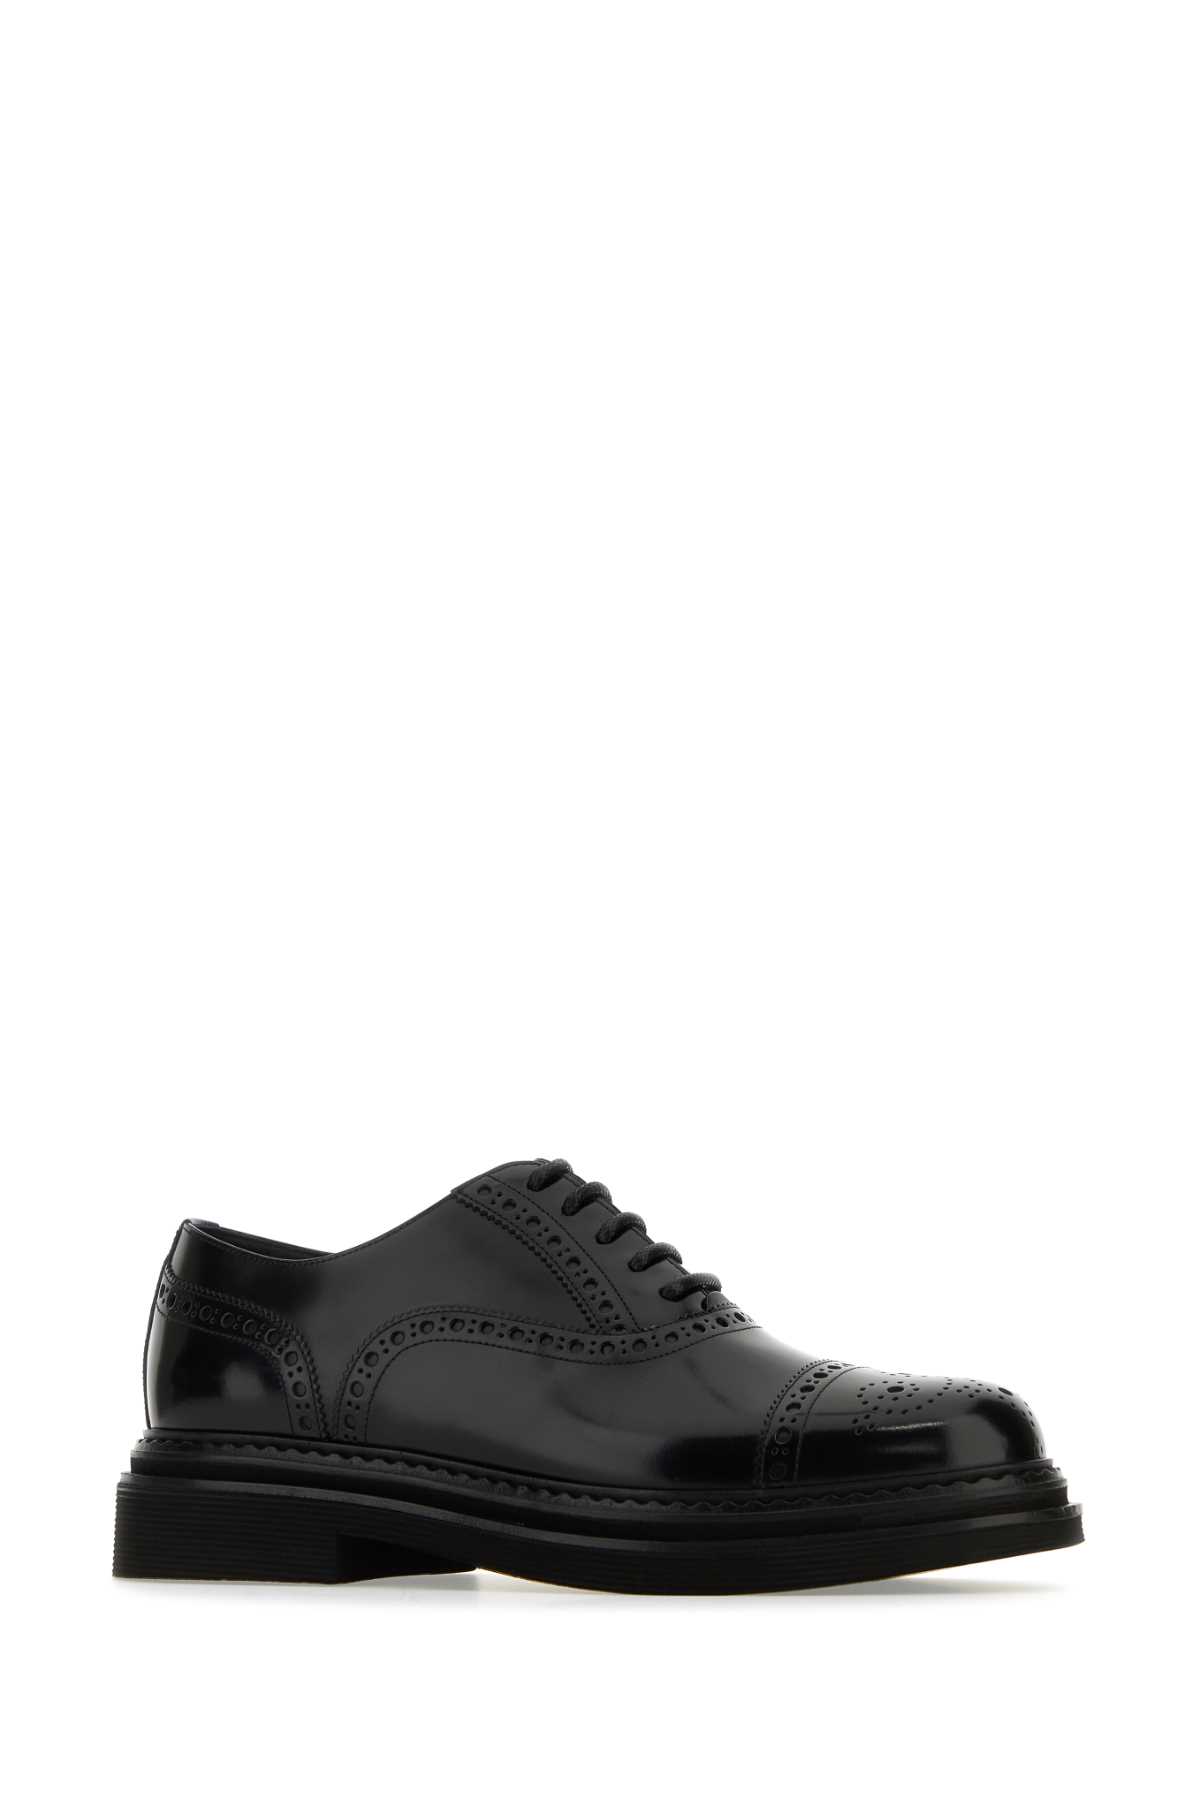 Shop Dolce & Gabbana Black Leather Lace-up Shoes In Nero